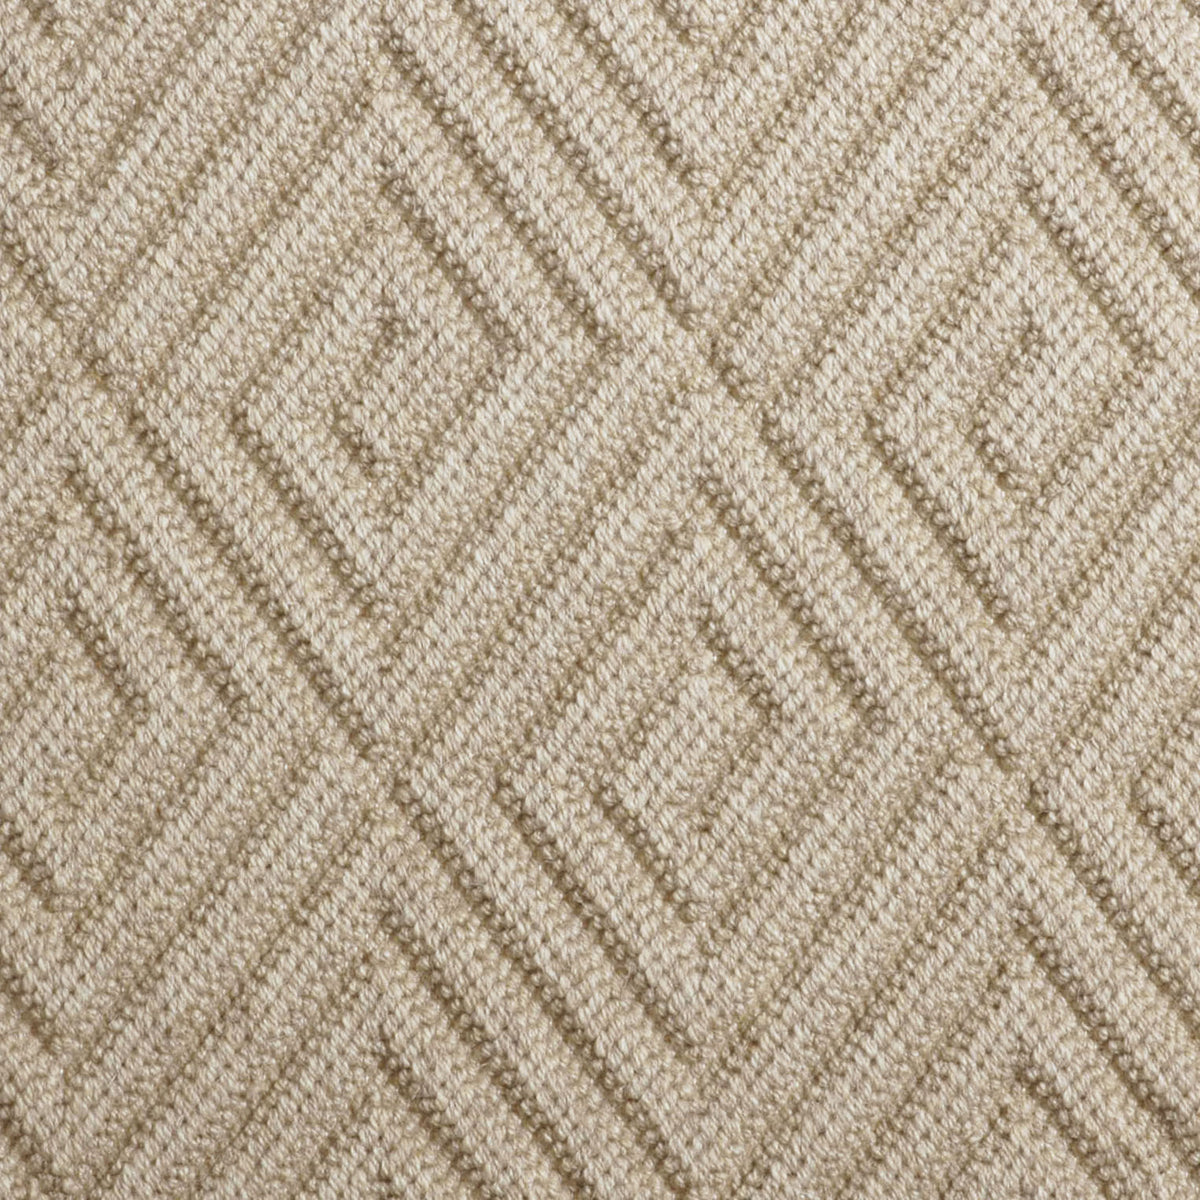 100% Wool Rug in Custom and 15 Standard Sizes -Cadence Warms